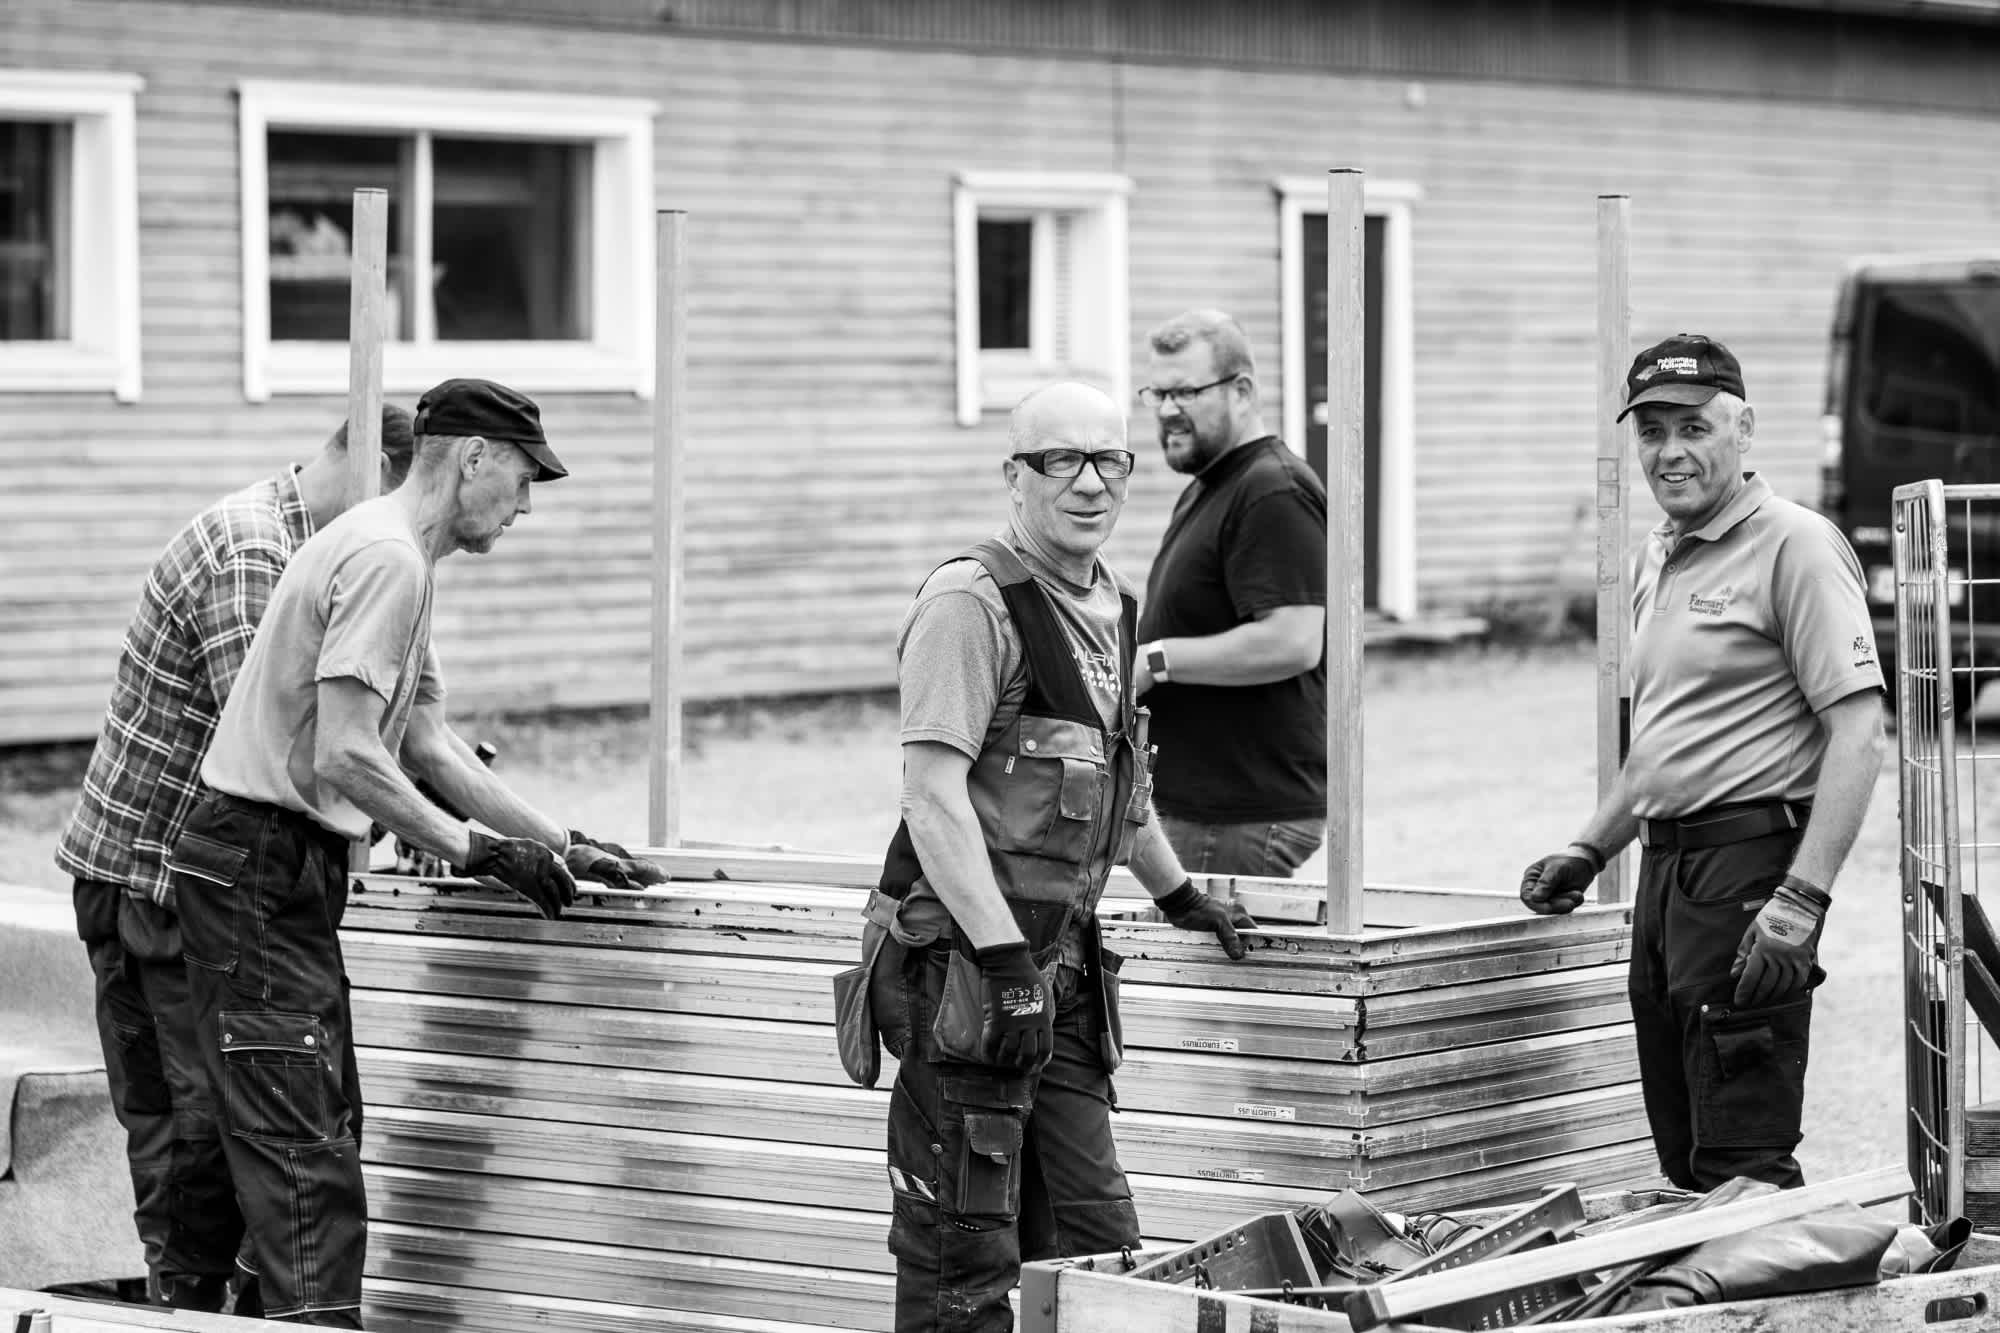 Black and white image of a group of construction workers building something. 